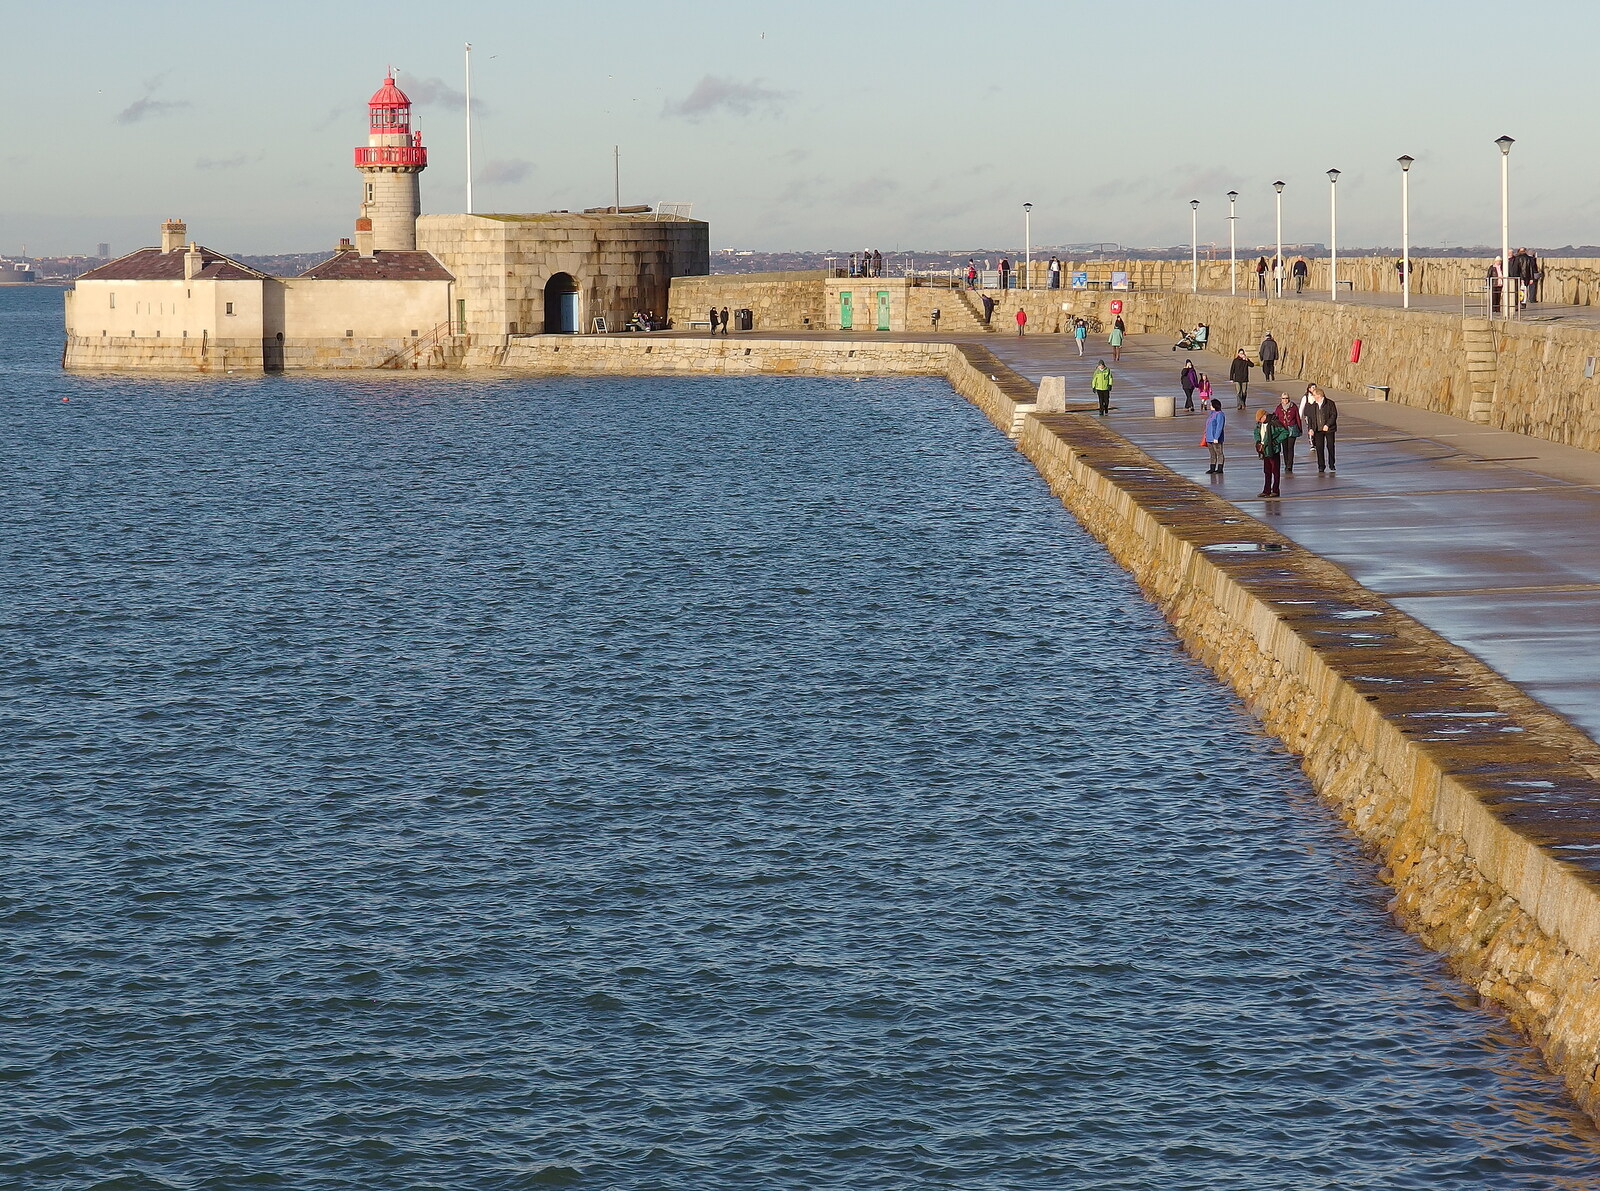 The East Pier from Dun Laoghaire and an Electrical Disaster, Monkstown, County Dublin, Ireland - 4th January 2014